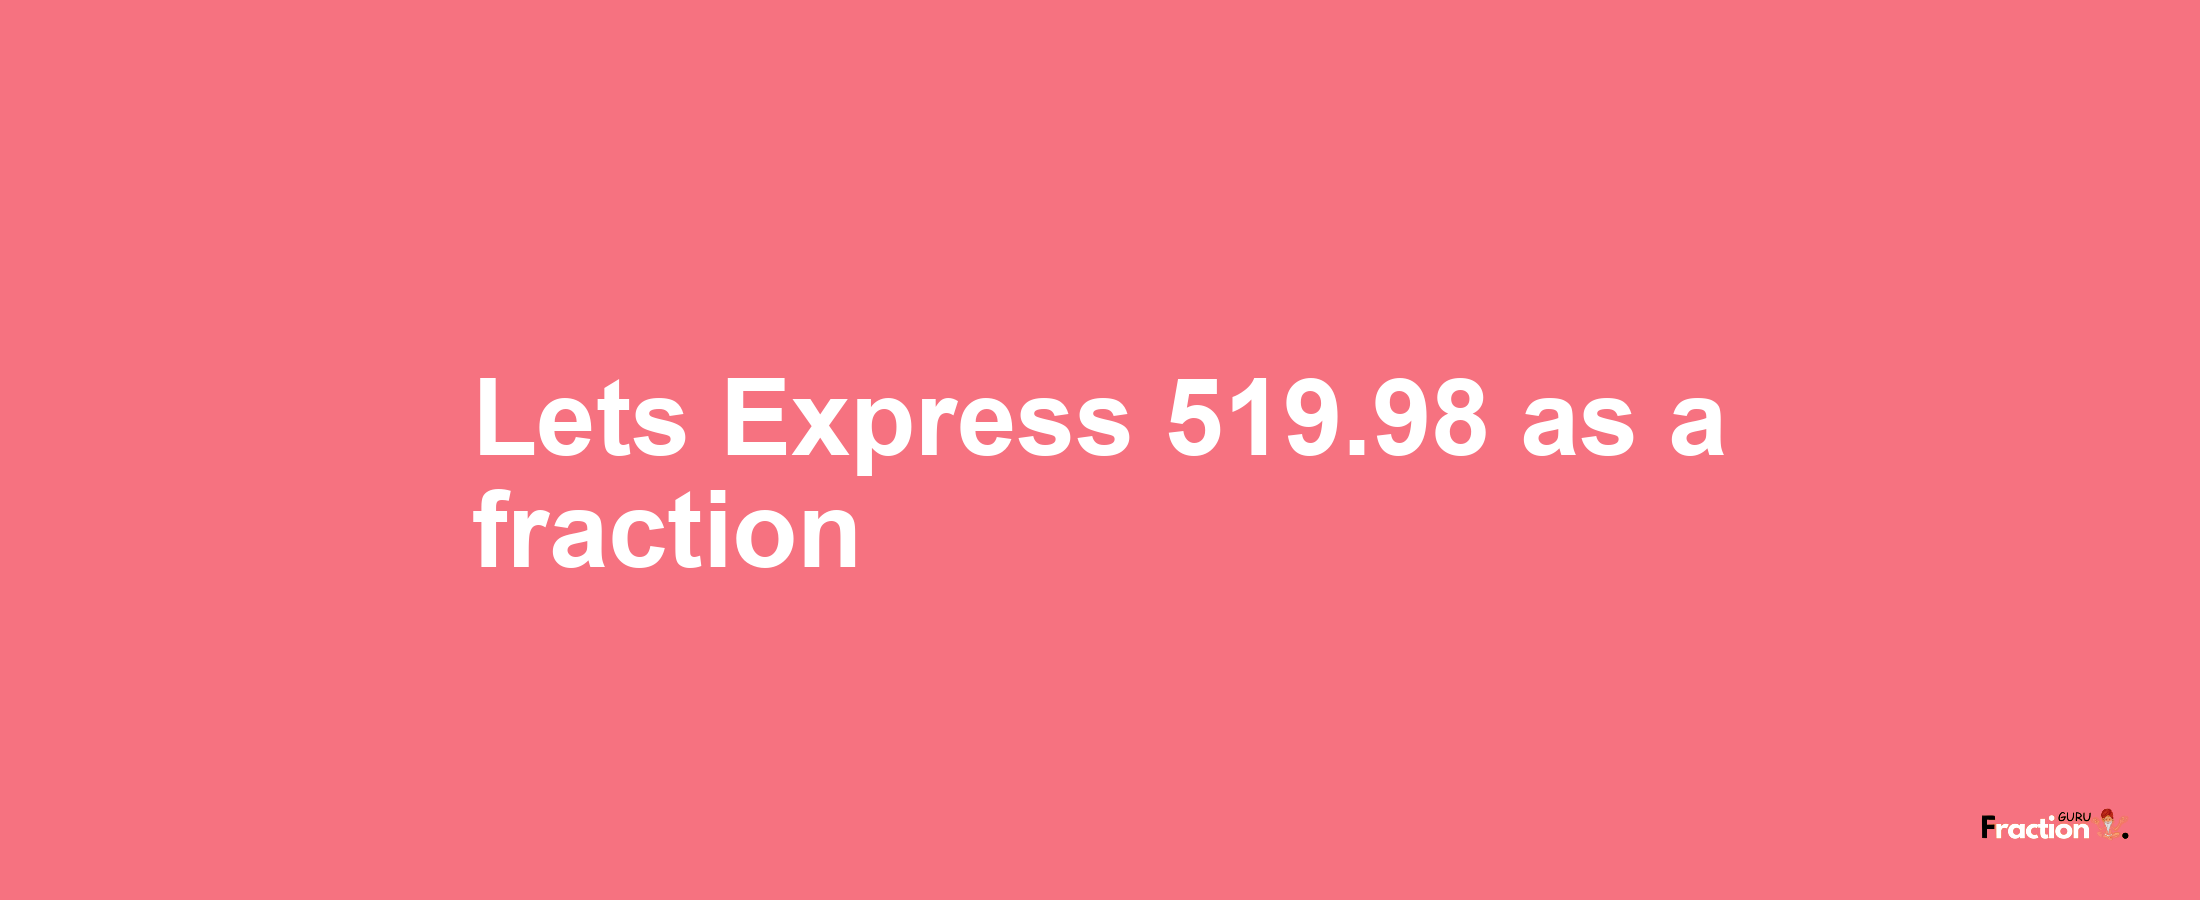 Lets Express 519.98 as afraction